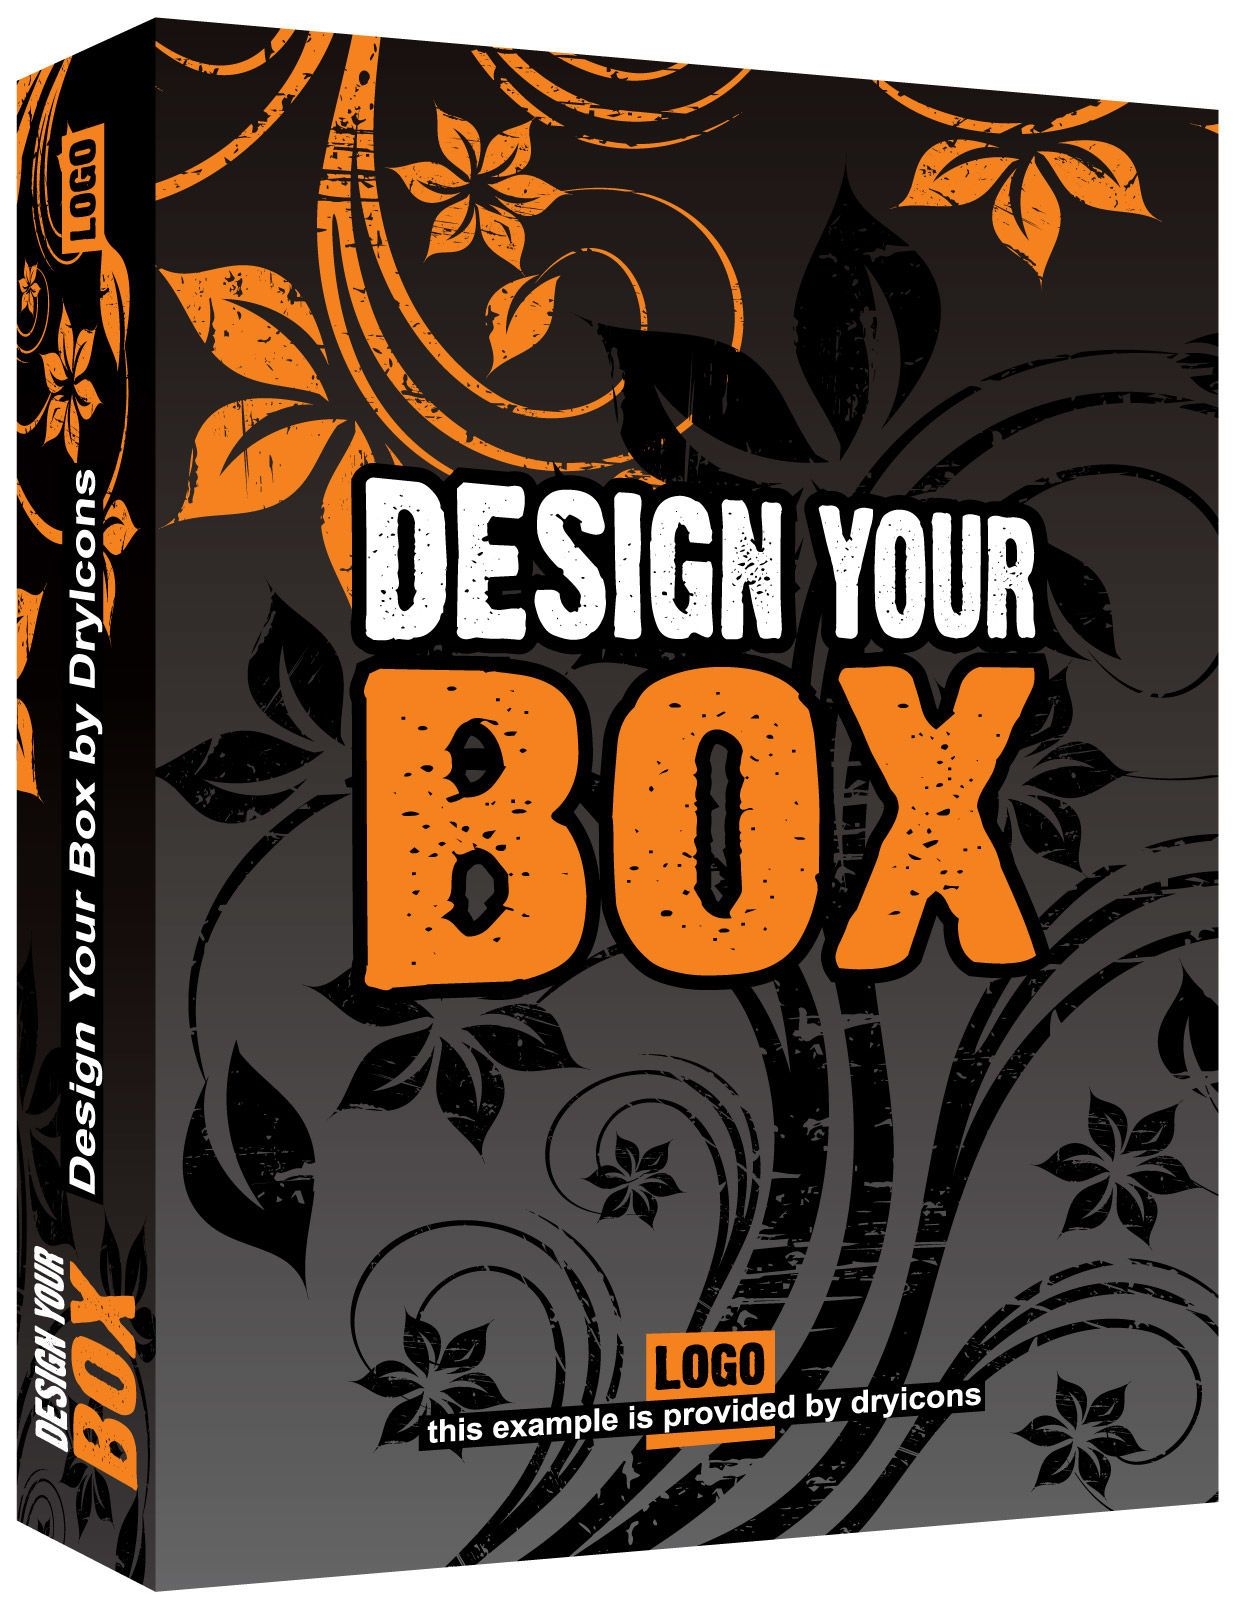 3D Floral Package Box